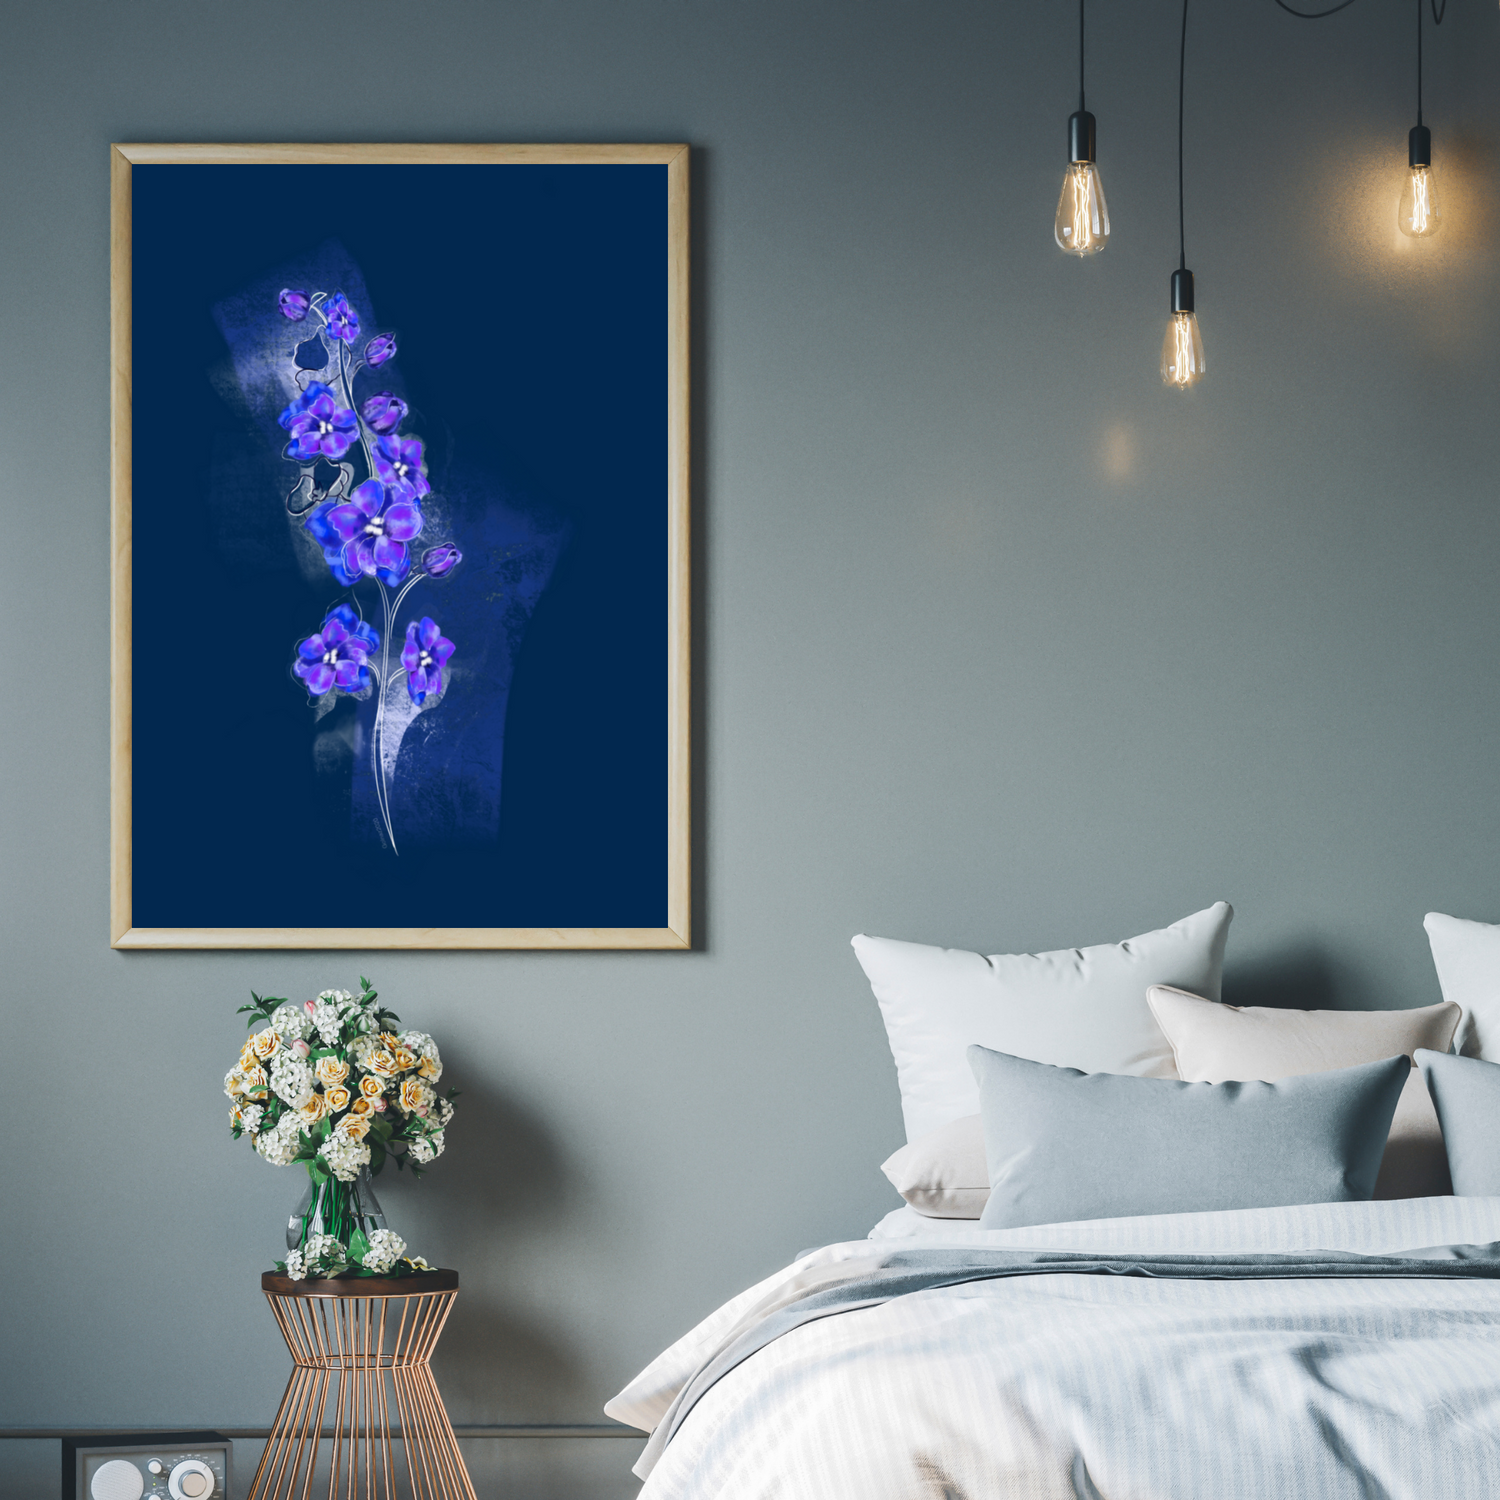 An example of the Larkspur painting by ArisaTeam in a bedroom